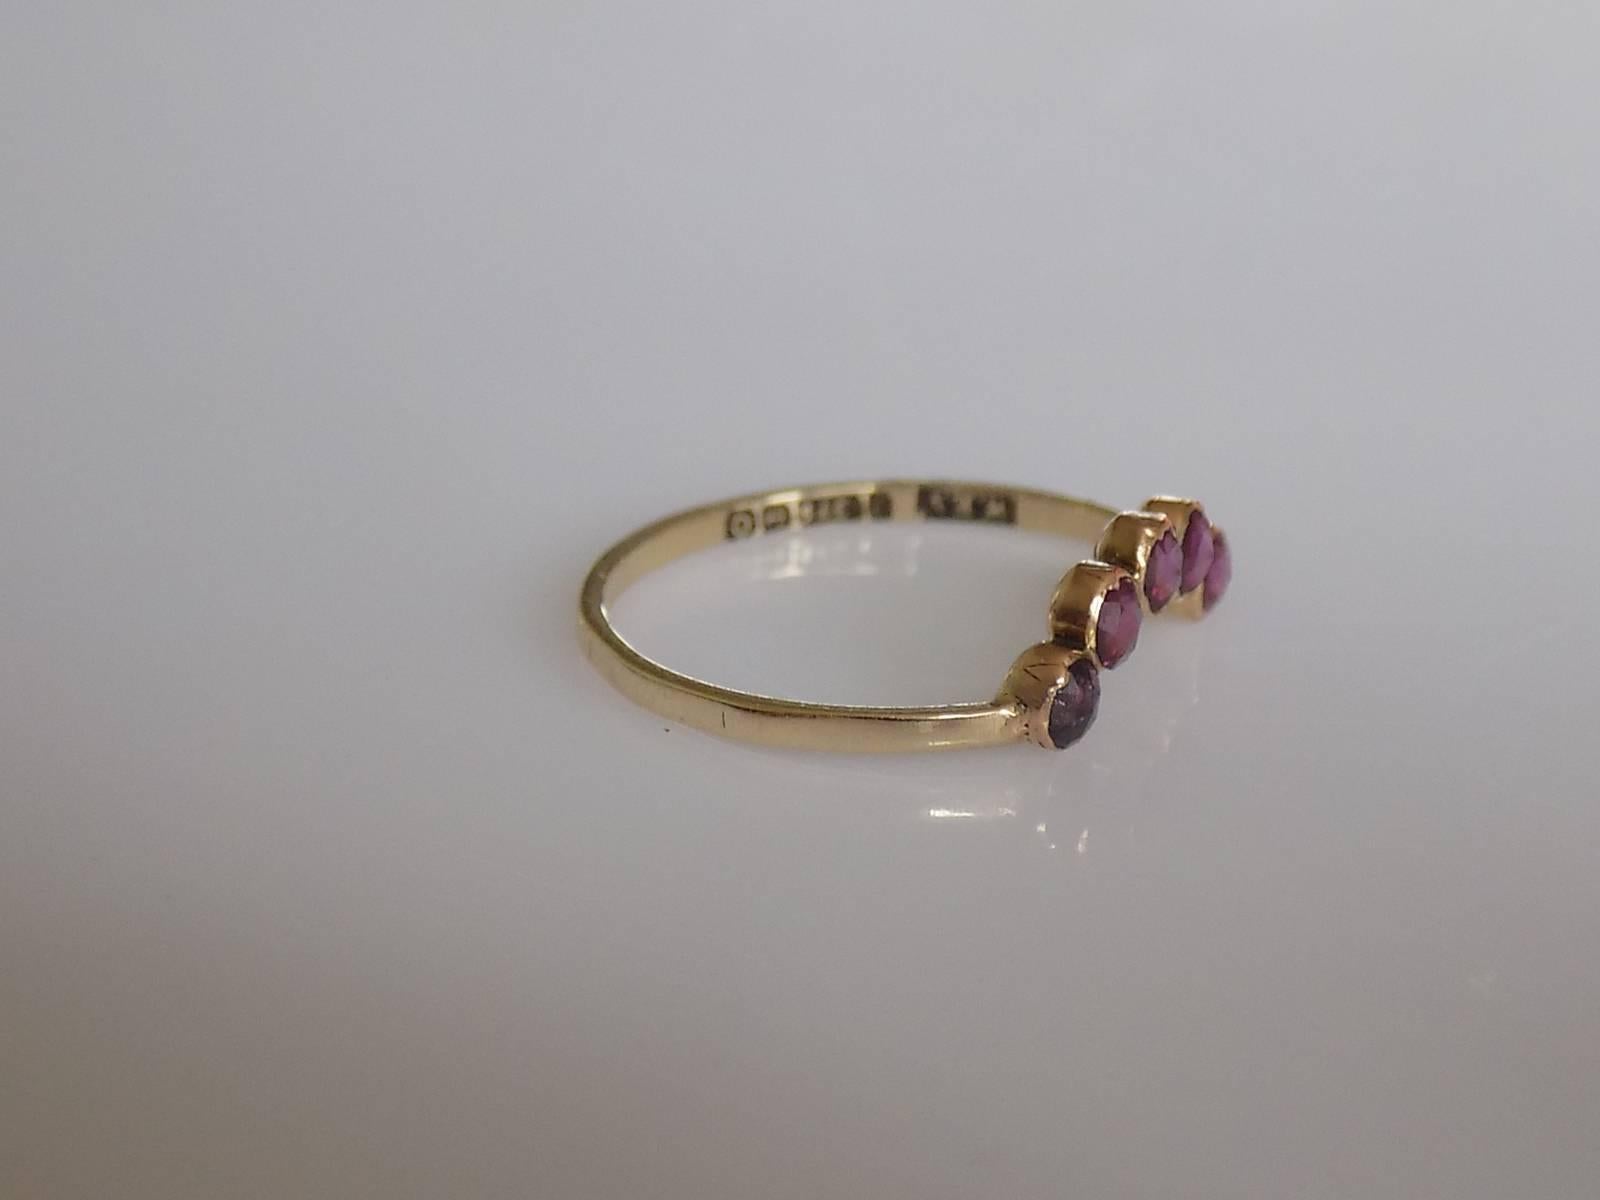 A Lovely Georgian pre-1837 rose cut Garnet hair ornament conversion ring. The Garnets in closed back Gold setting on later 9 Carat Gold shank. Perfect as everyday ring. English origin.
Size P UK, 8 US.
Garnets from 3mm.
Full Birmingham hallmark for